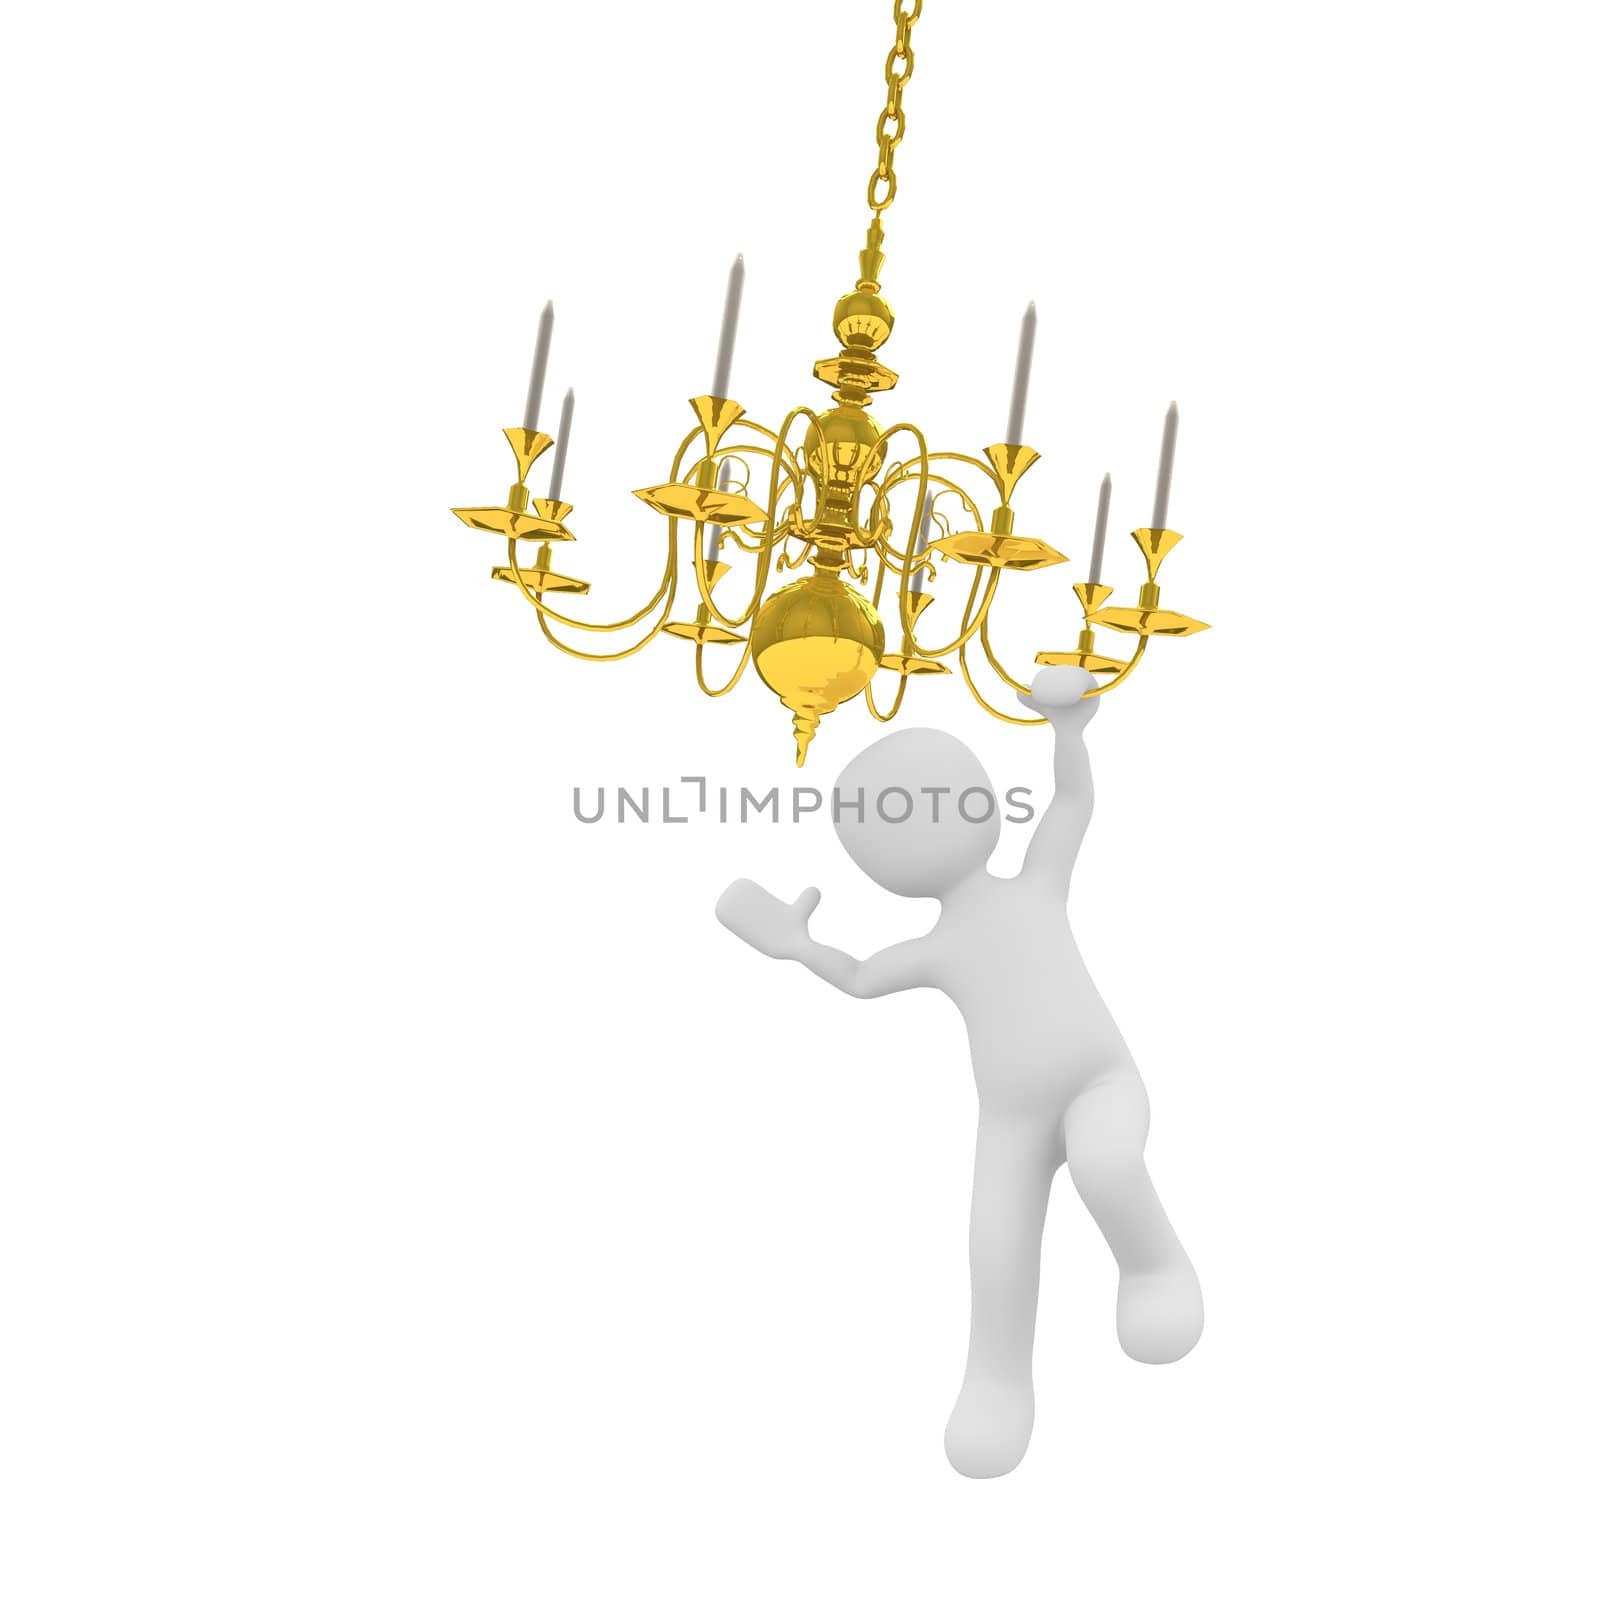 Sitting on the swing on the chandelier hangs a man because he is probably high?